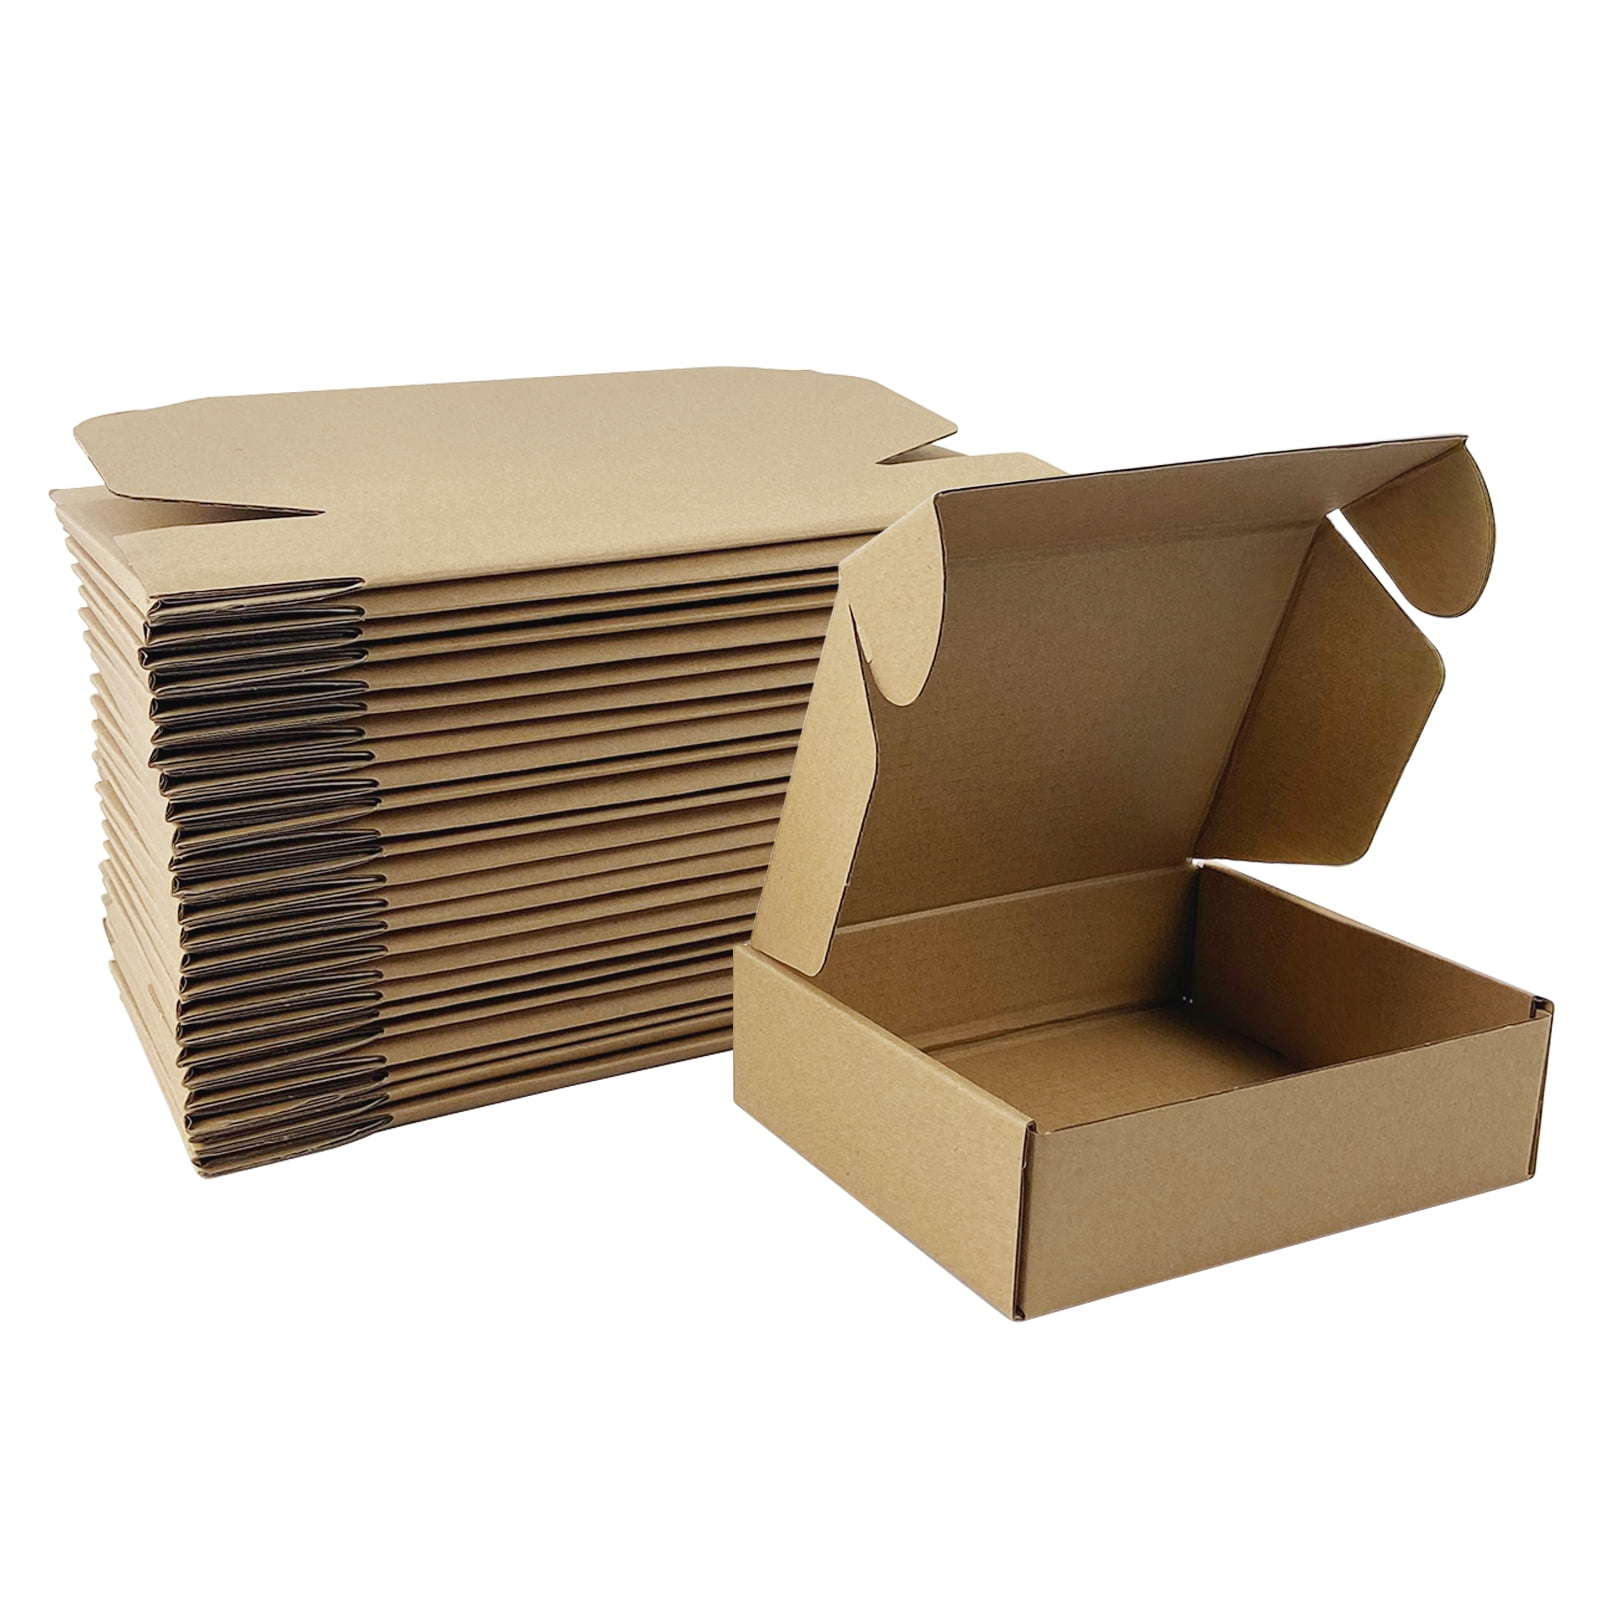 26x10x10 New Corrugated Boxes for Moving or Shipping Needs 32 ECT 